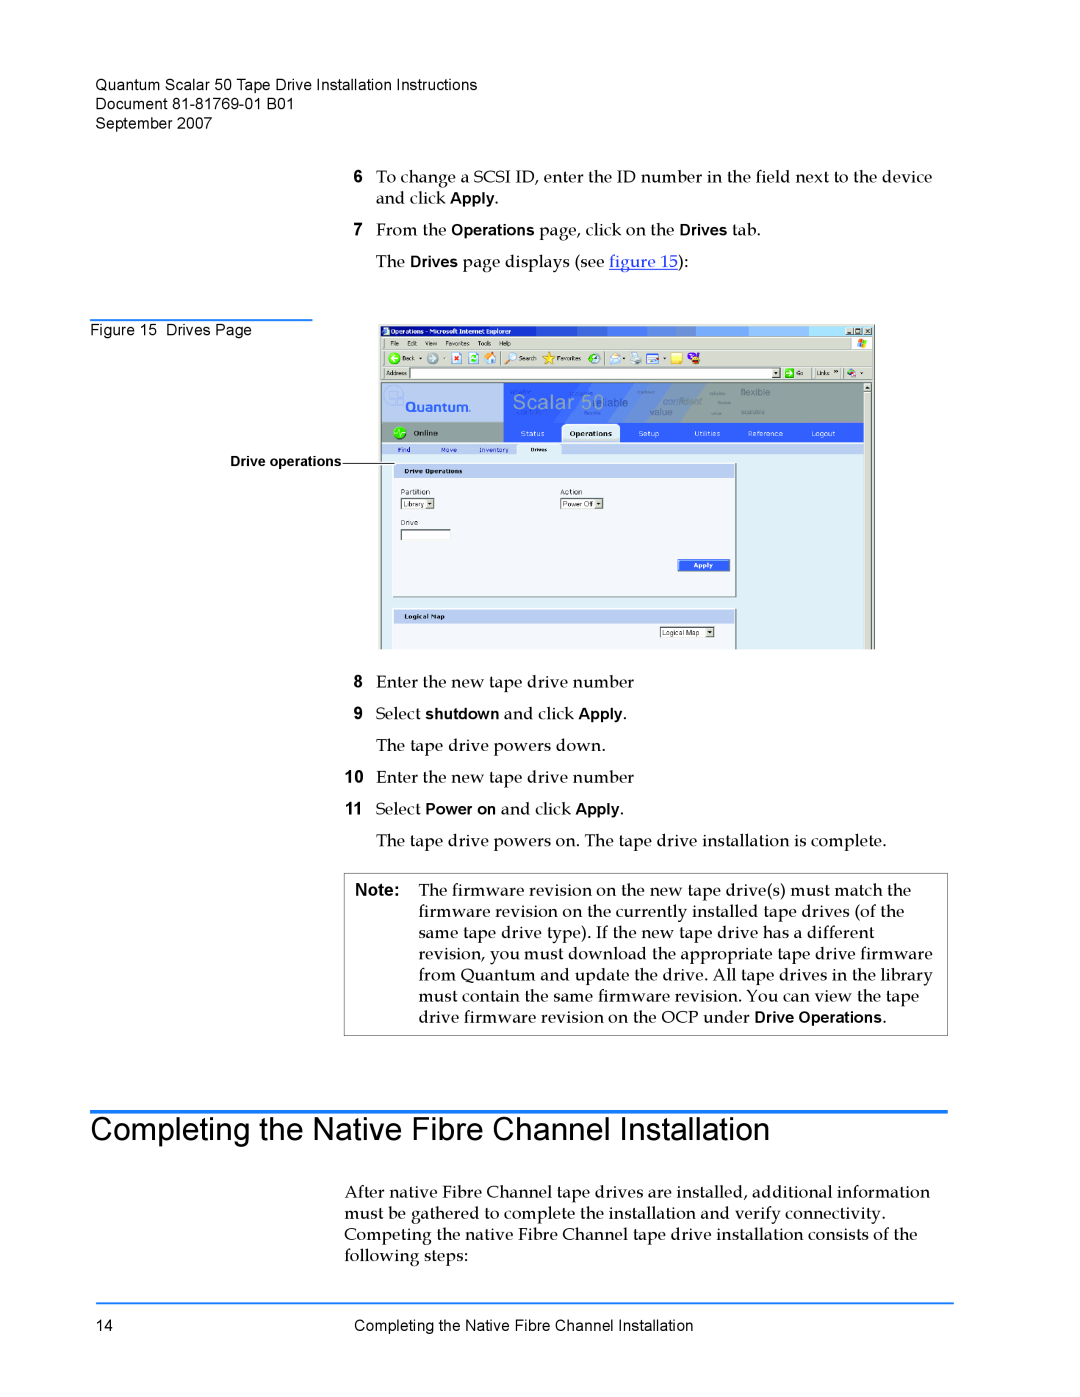 Quantum Audio Scalar 50 installation instructions Completing the Native Fibre Channel Installation 